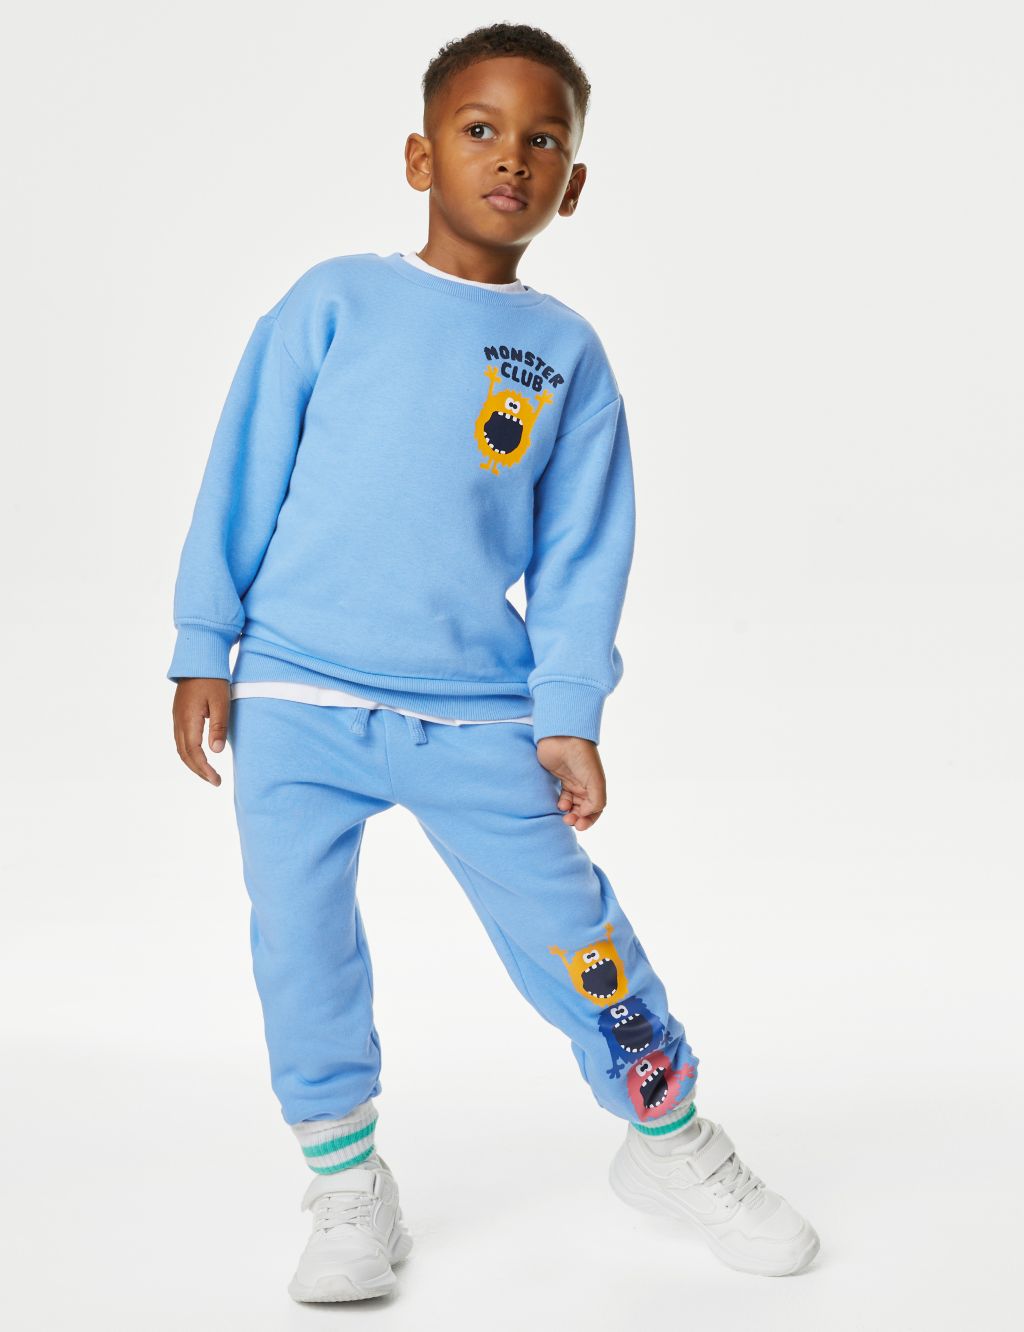 Shop Younger Boys’ Outfits at M&S